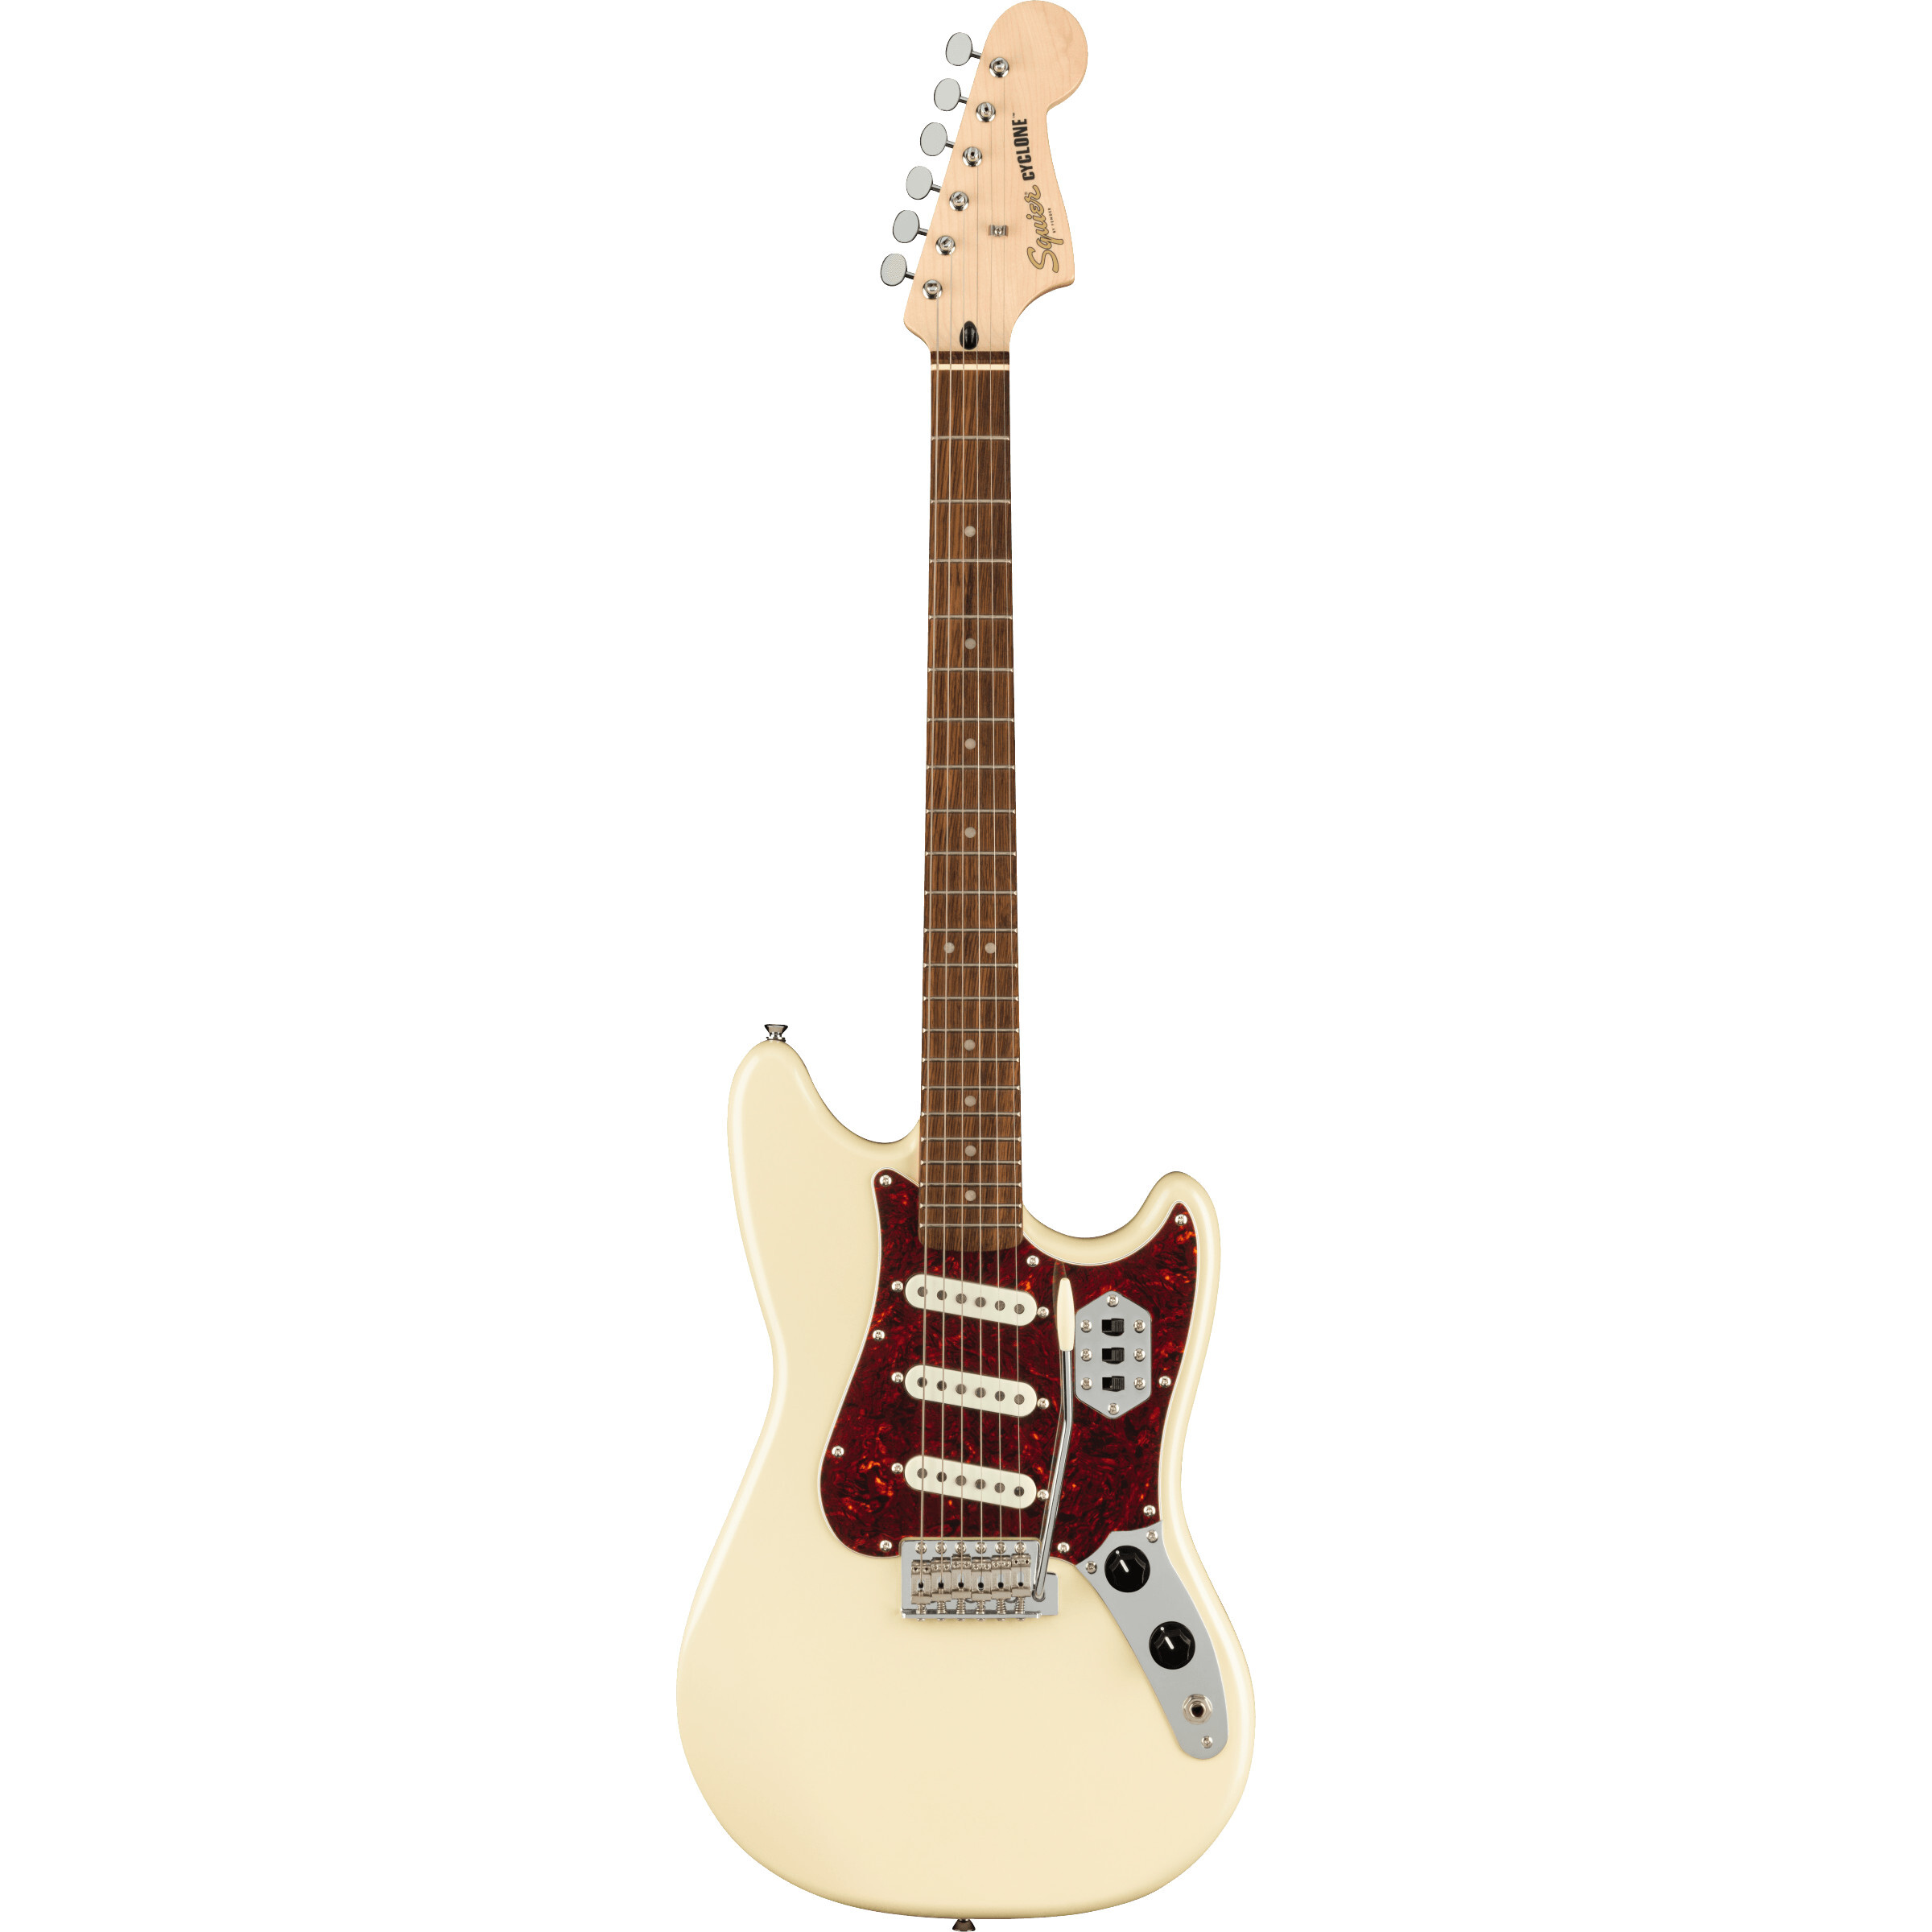 Squier Paranormal Cyclone Pearl White IL